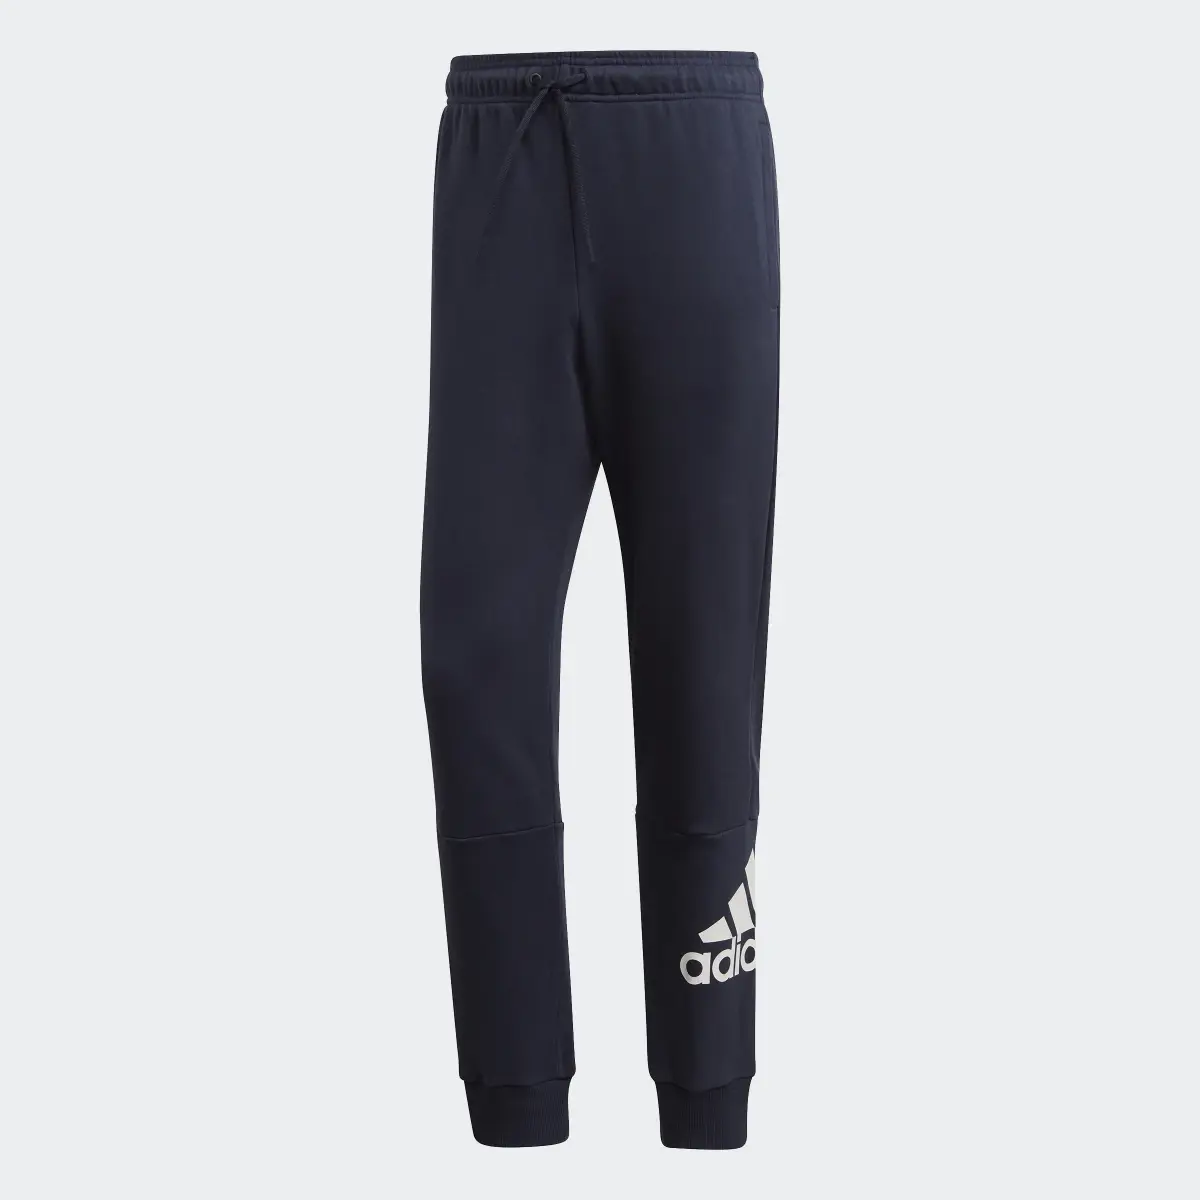 Adidas Badge of Sport French Terry Pants. 1